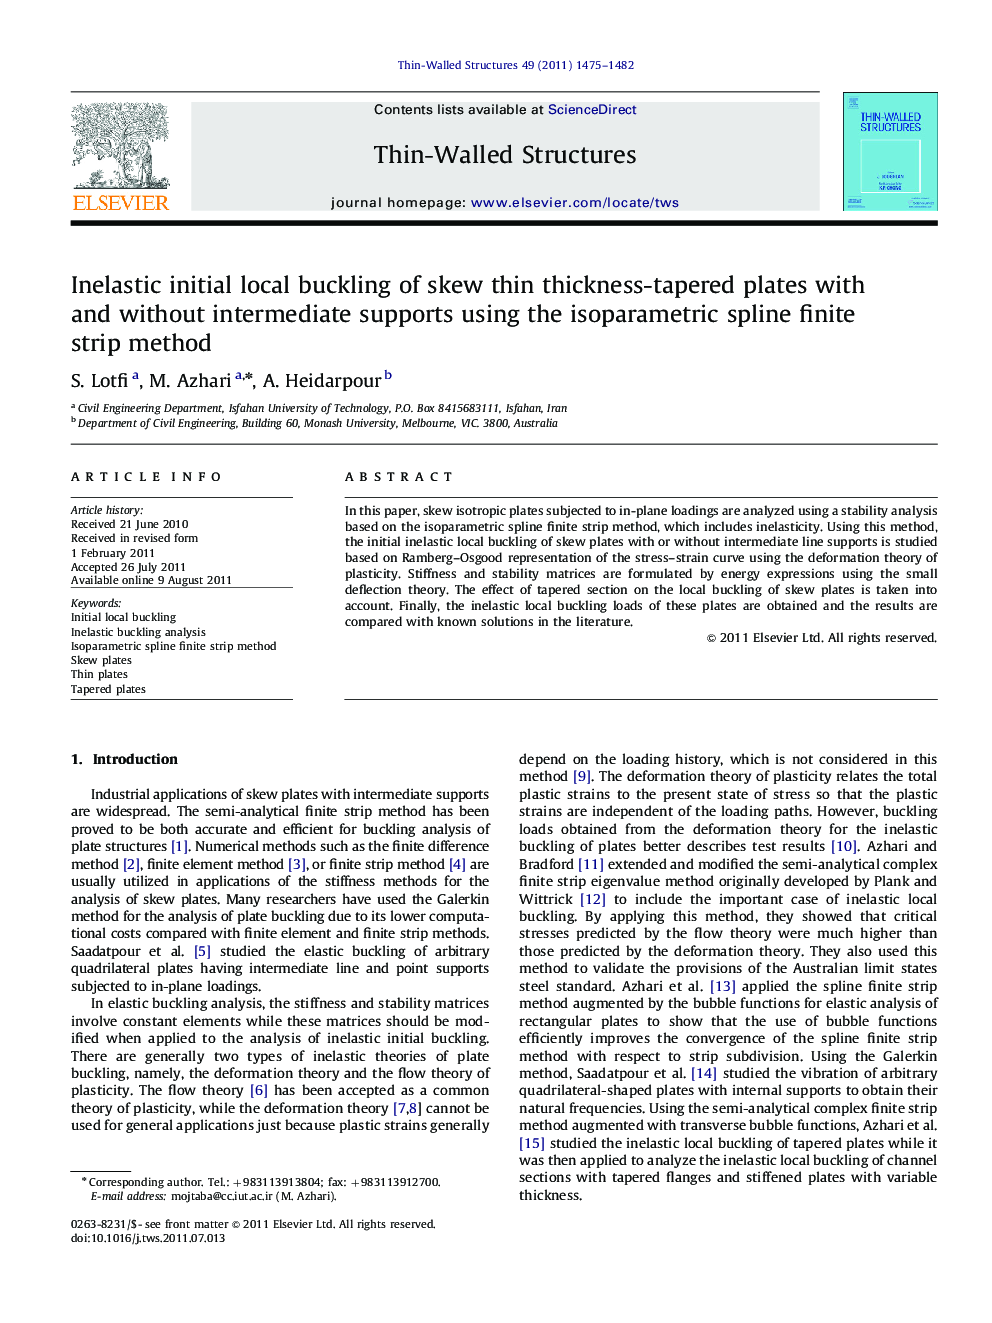 Inelastic initial local buckling of skew thin thickness-tapered plates with and without intermediate supports using the isoparametric spline finite strip method